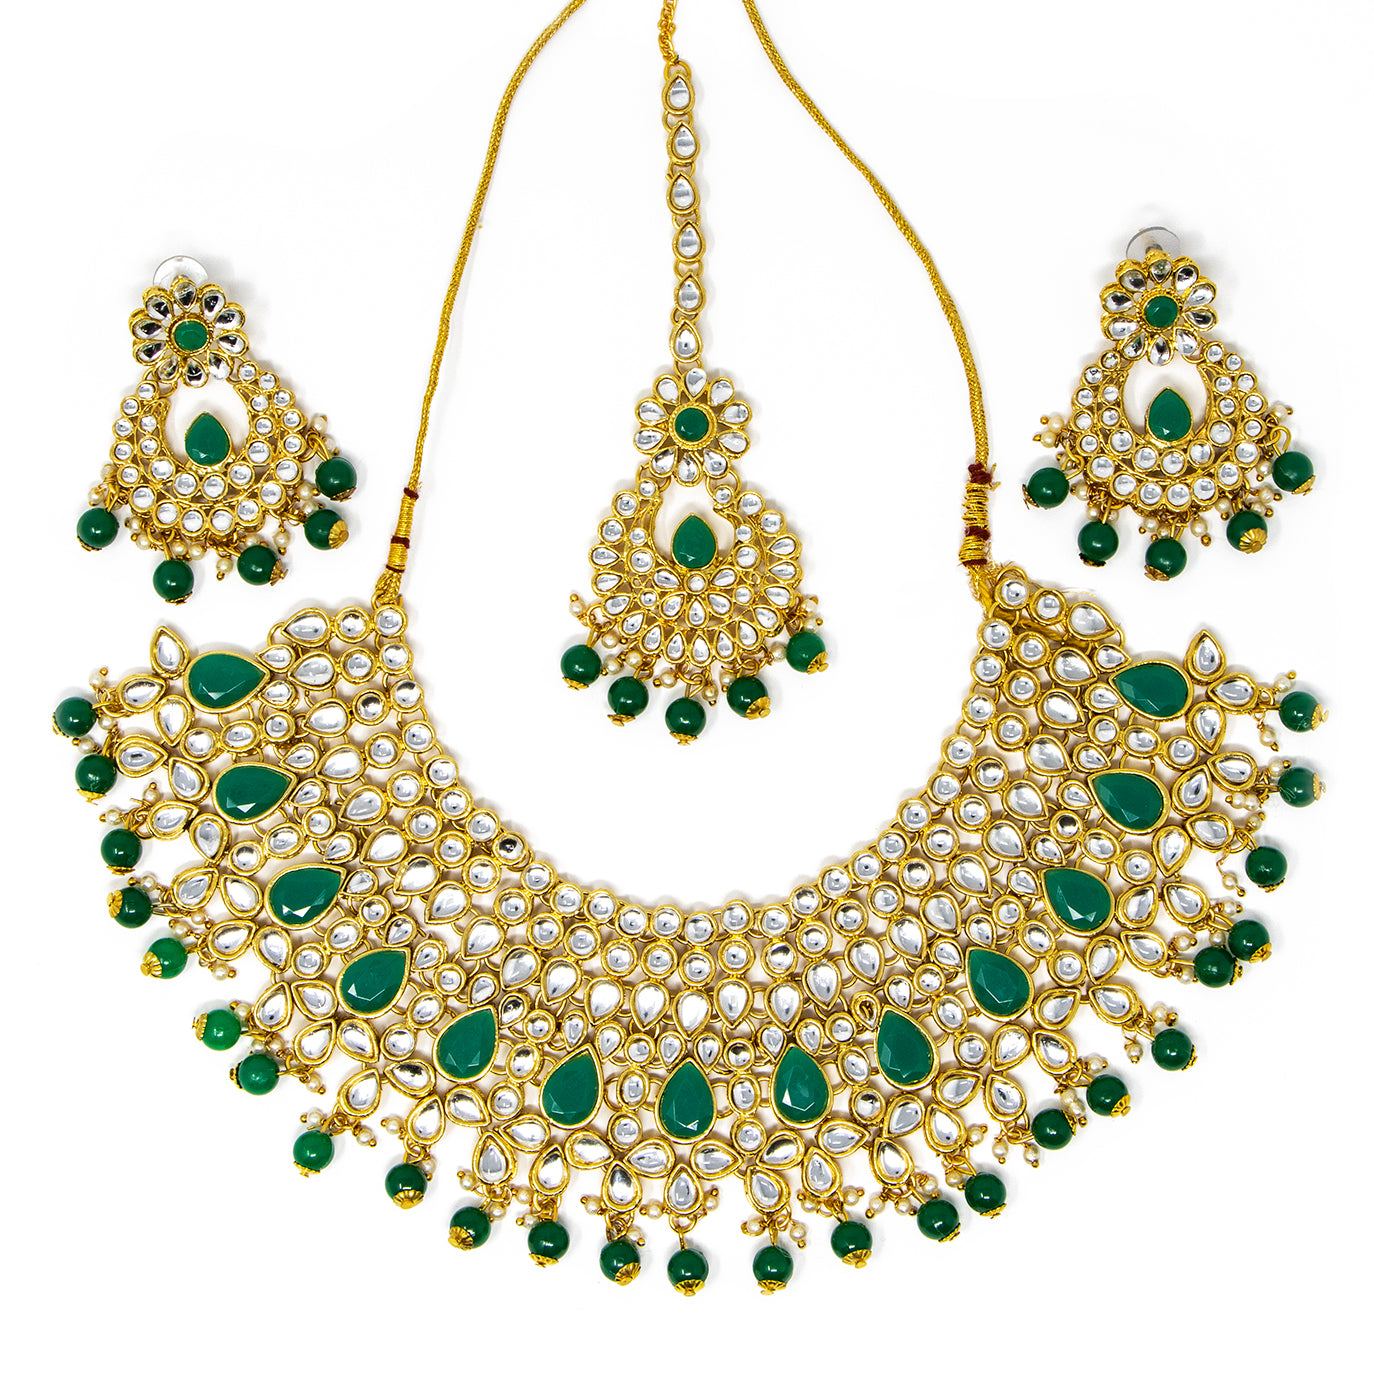  Necklace with earrings and bindi (forehead piece). Color: Gold and Green